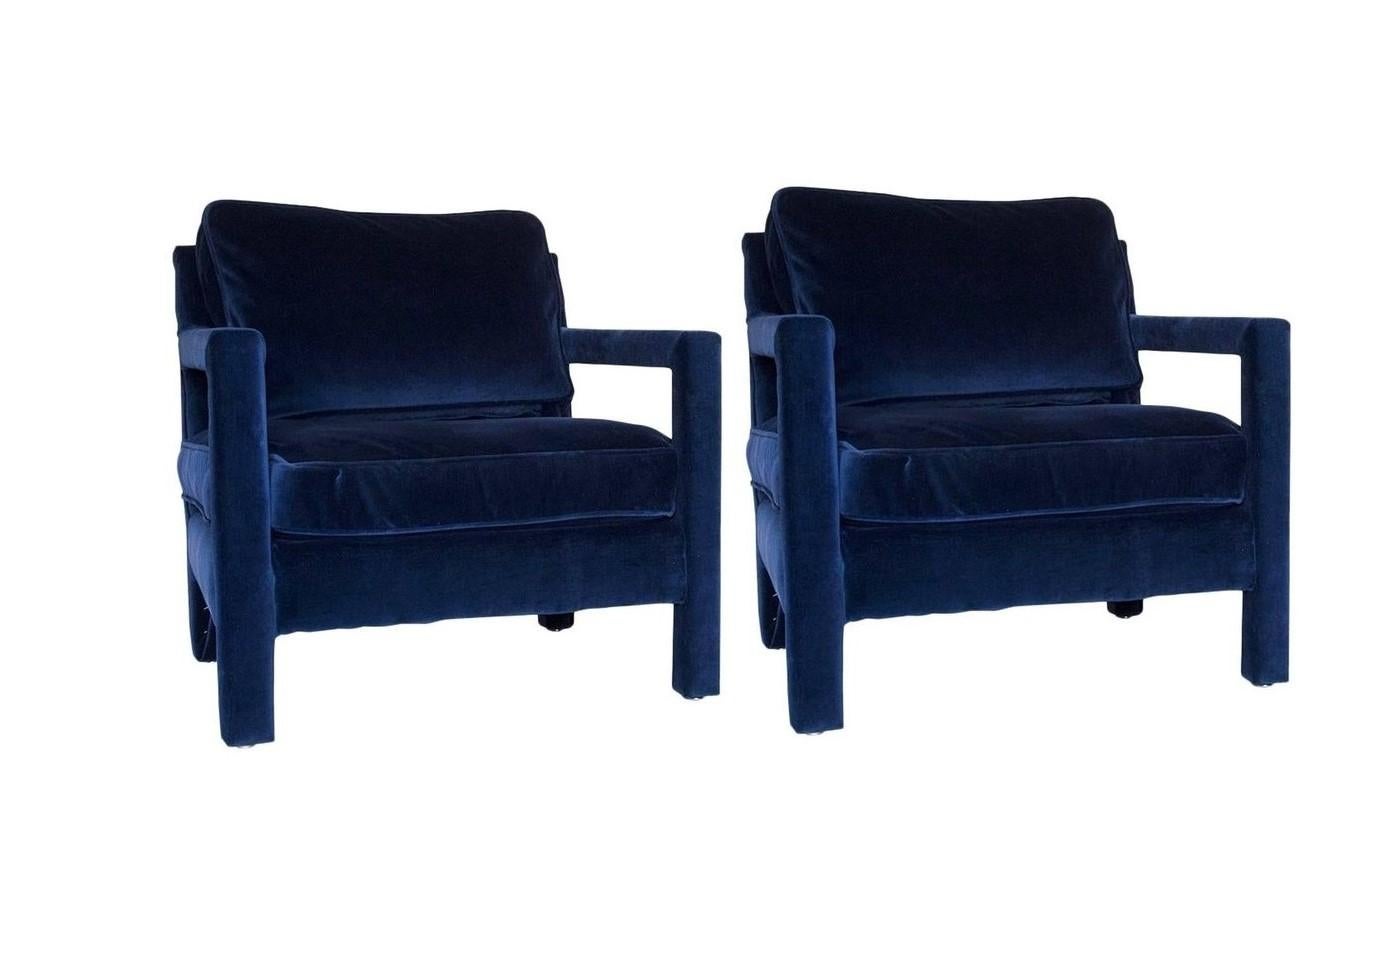 These lovely, well-constructed fully upholstered armchairs. Completely redone with new high density foam and upholstered in a deep blue velvet, these are comfortable and sensual to the touch. The cubist design and vibrant, earthy color elevate the